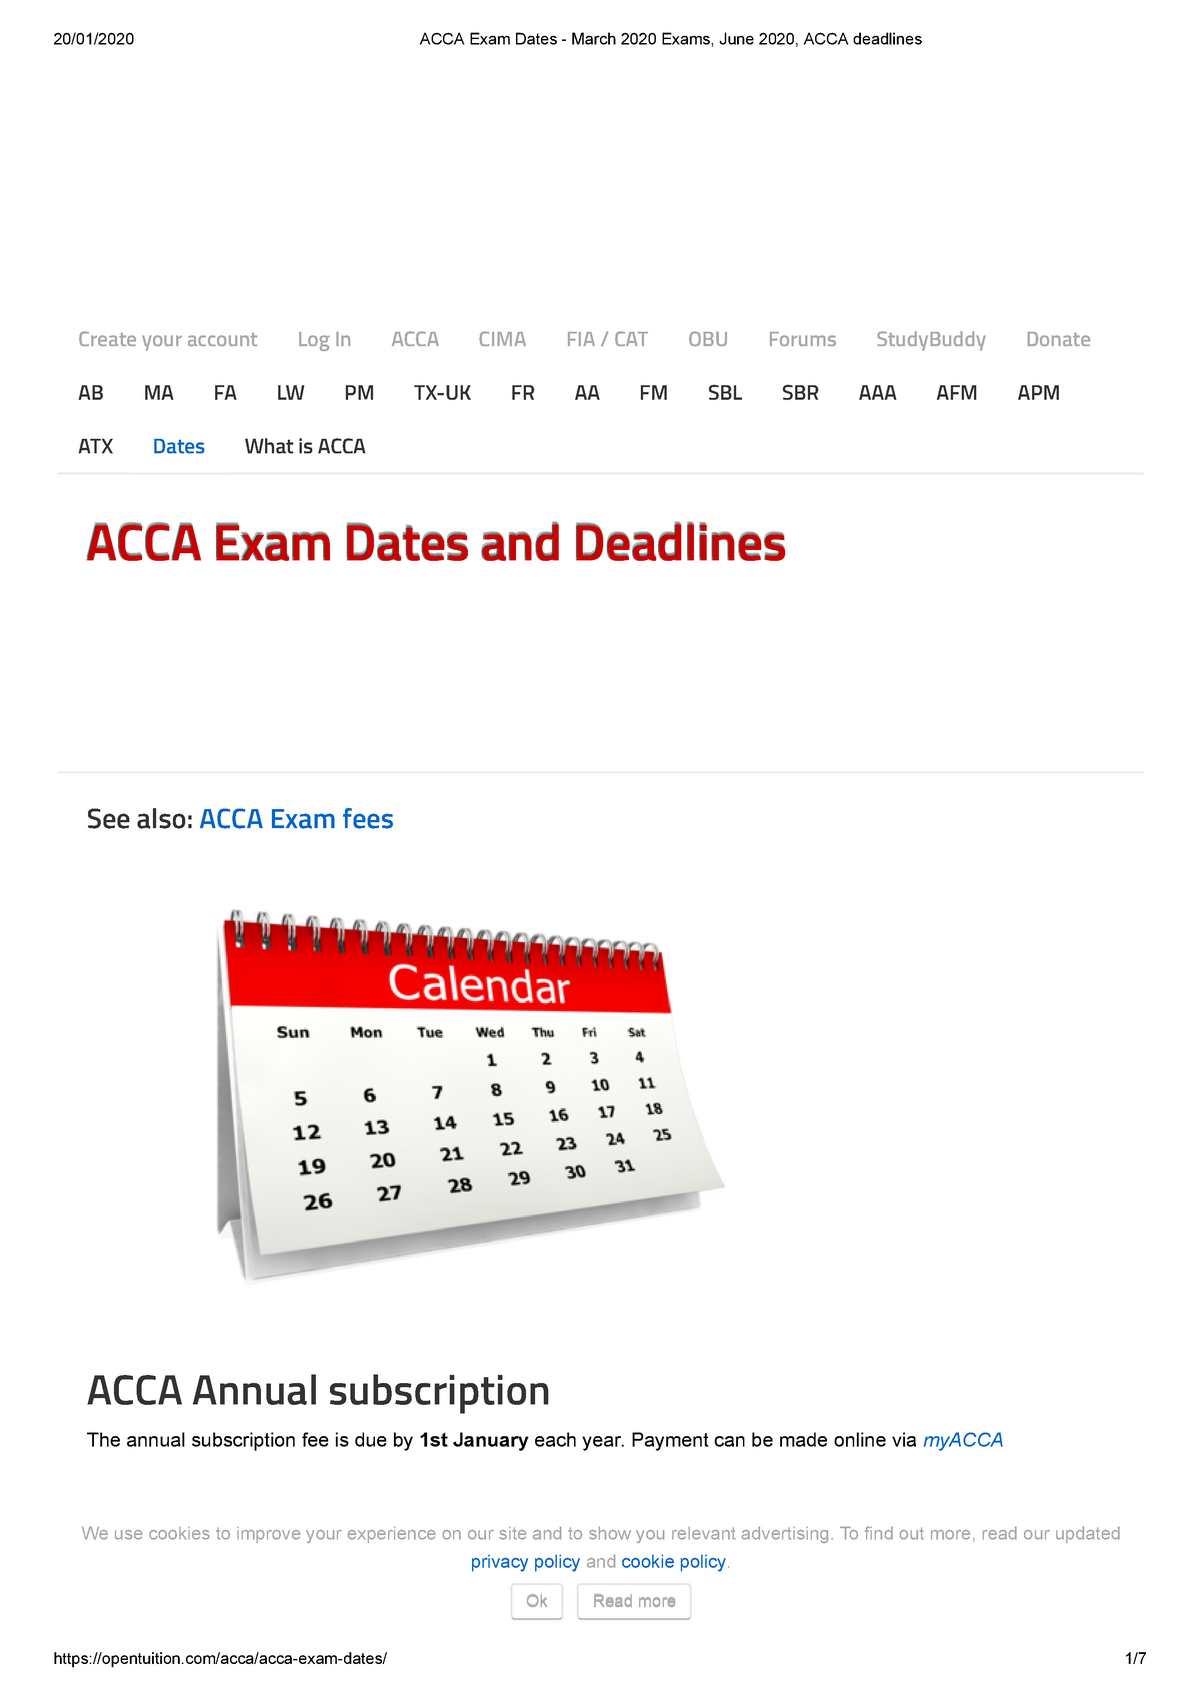 ACCA Exam Dates March 2020 Exams, June 2020, ACCA deadlines ACCA